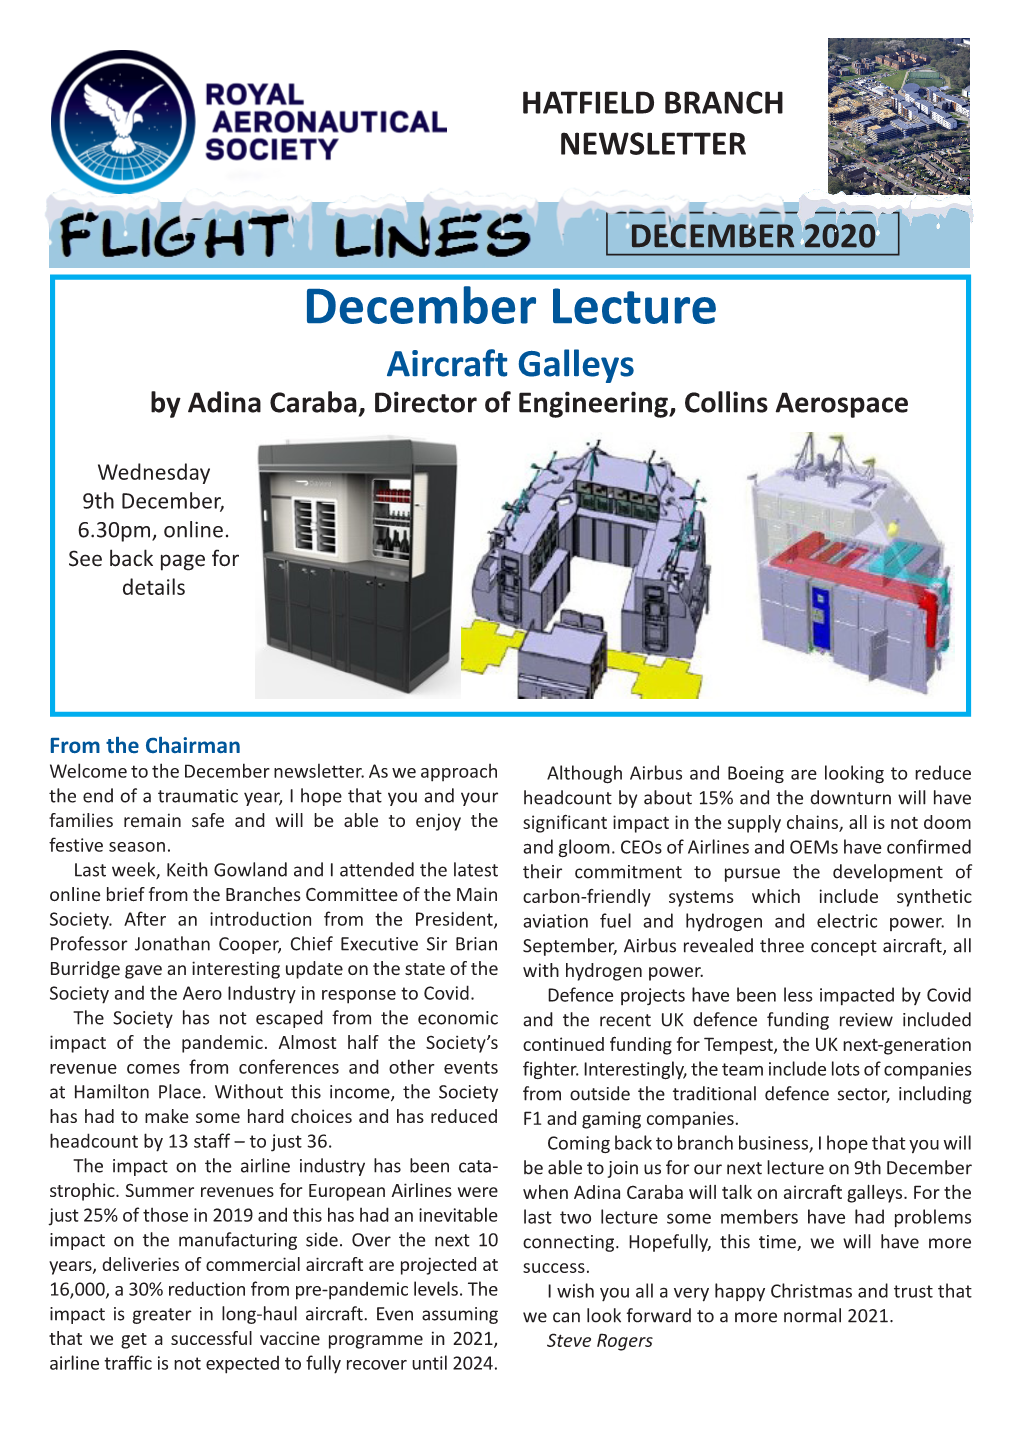 December Lecture Aircraft Galleys by Adina Caraba, Director of Engineering, Collins Aerospace